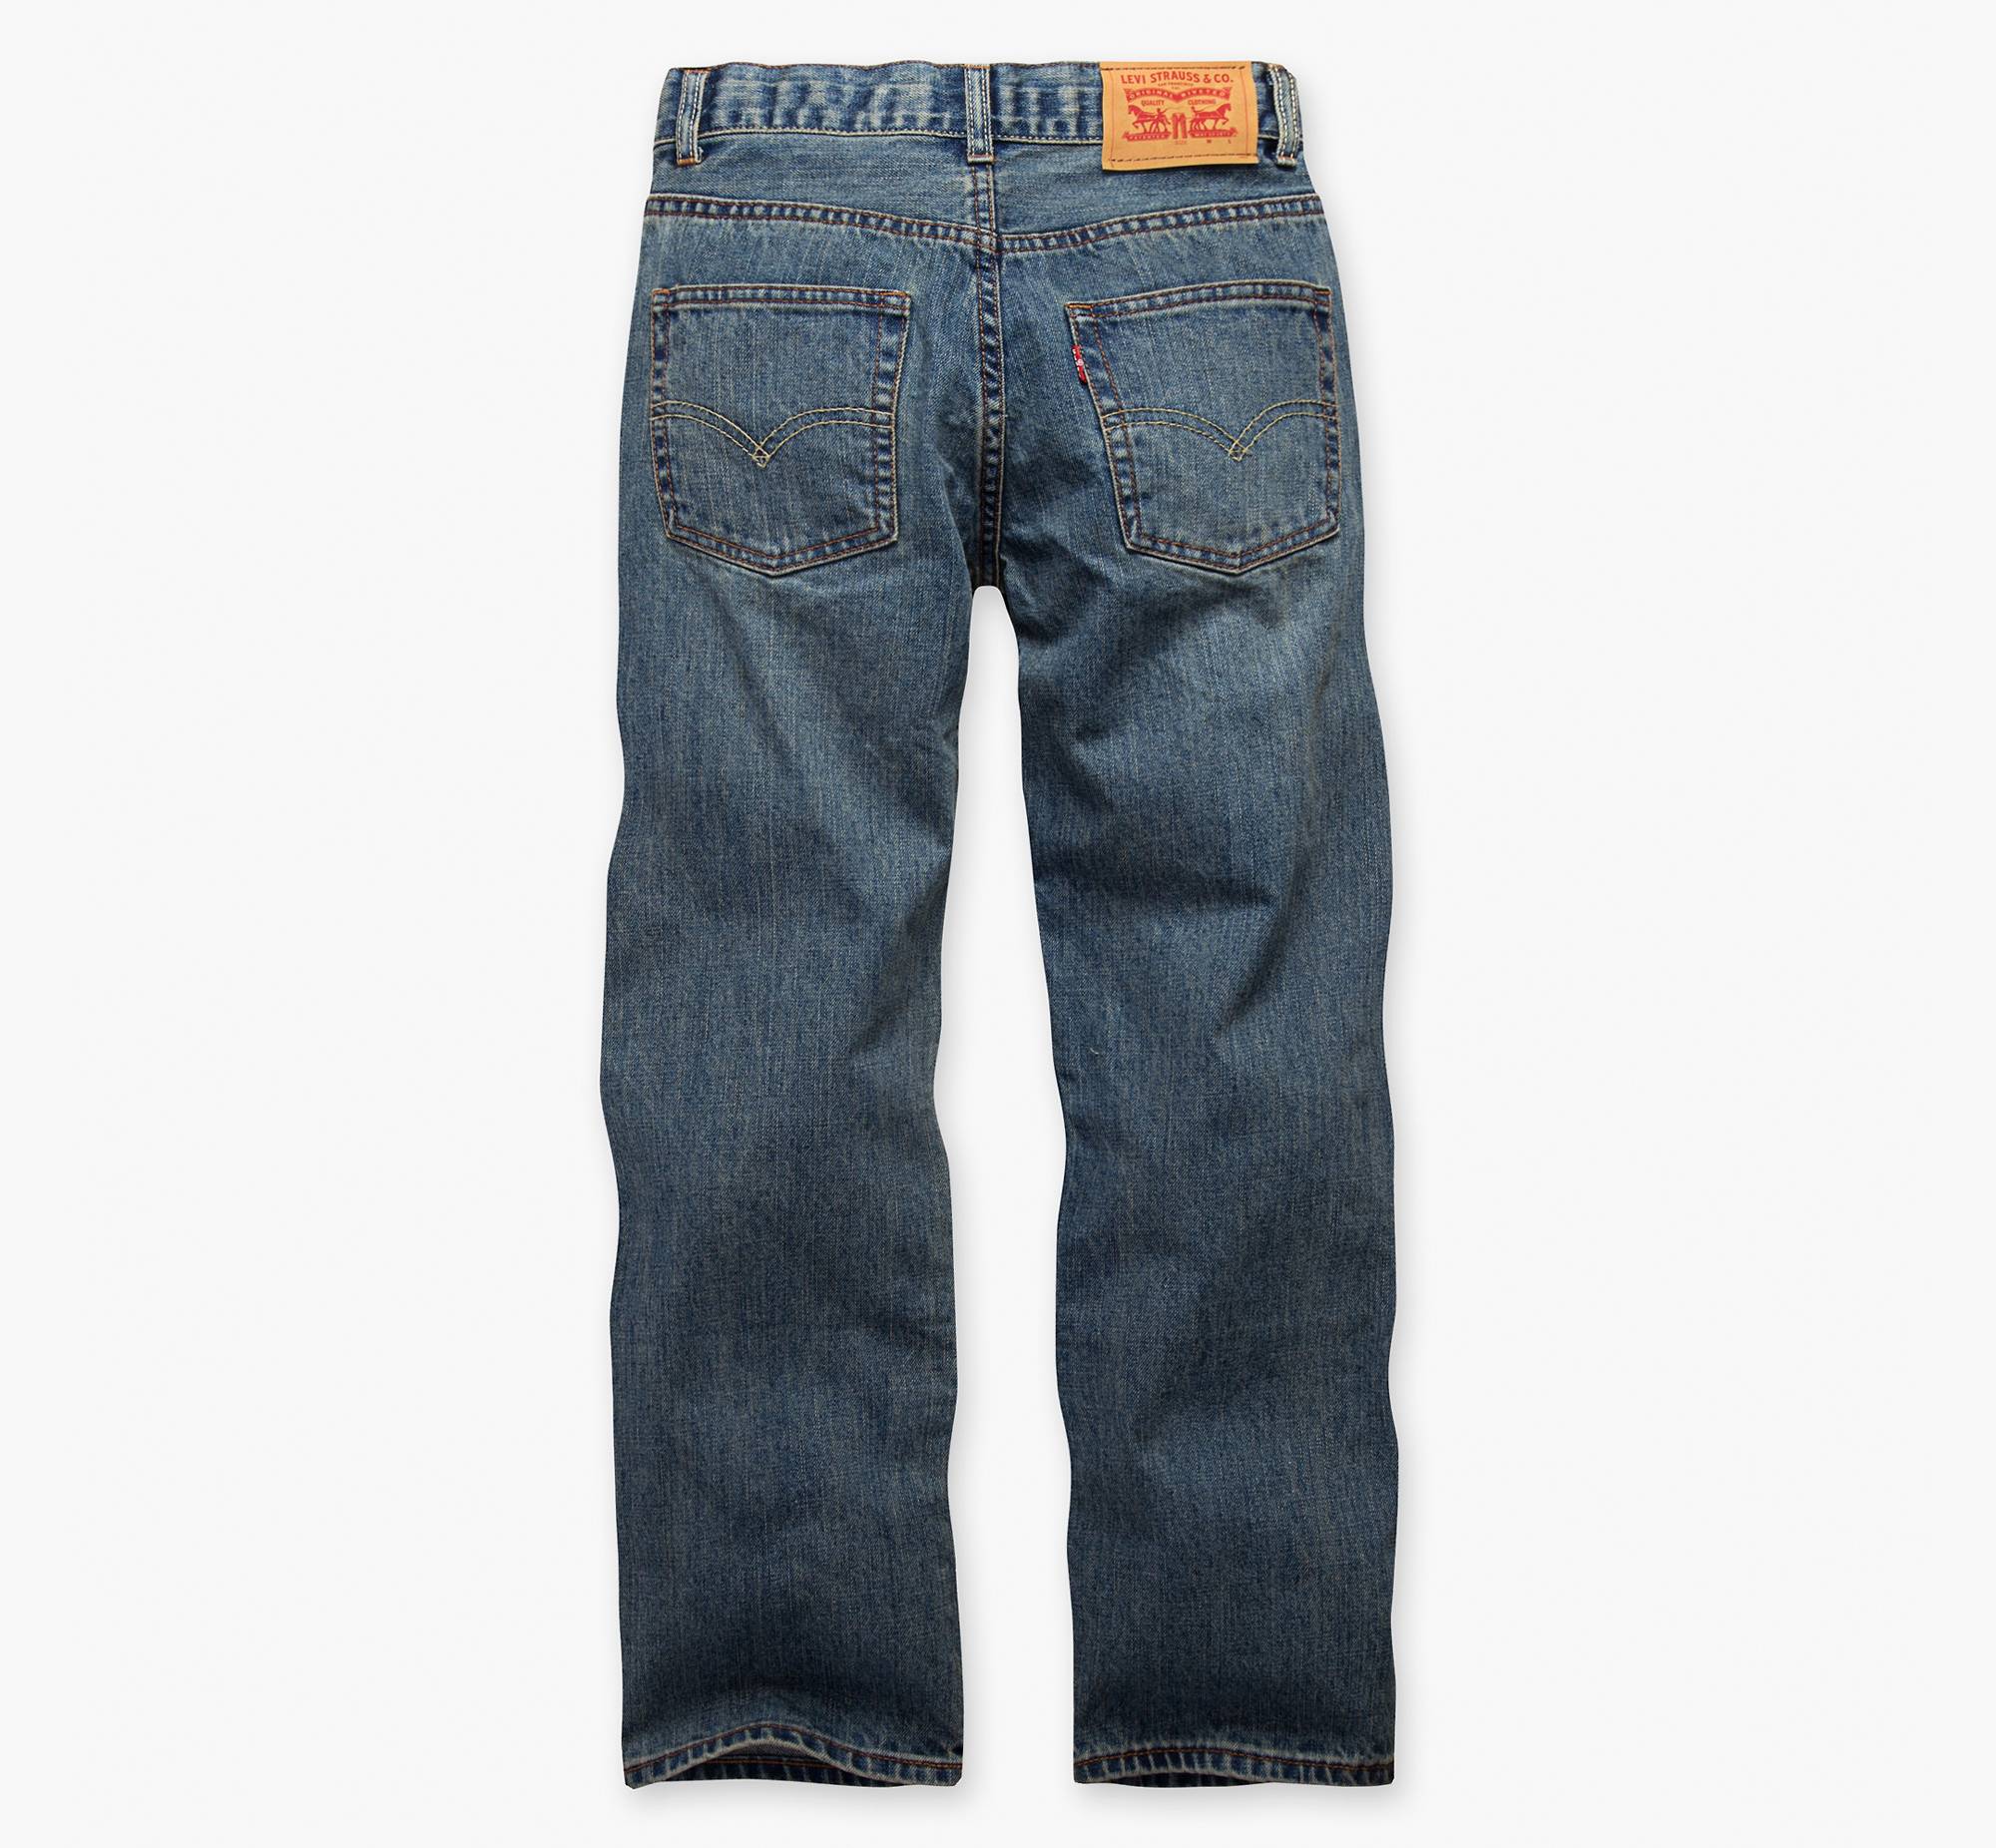 550™ Relaxed Fit Big Boys Jeans 8-20 (husky) - Medium Wash | Levi's® US